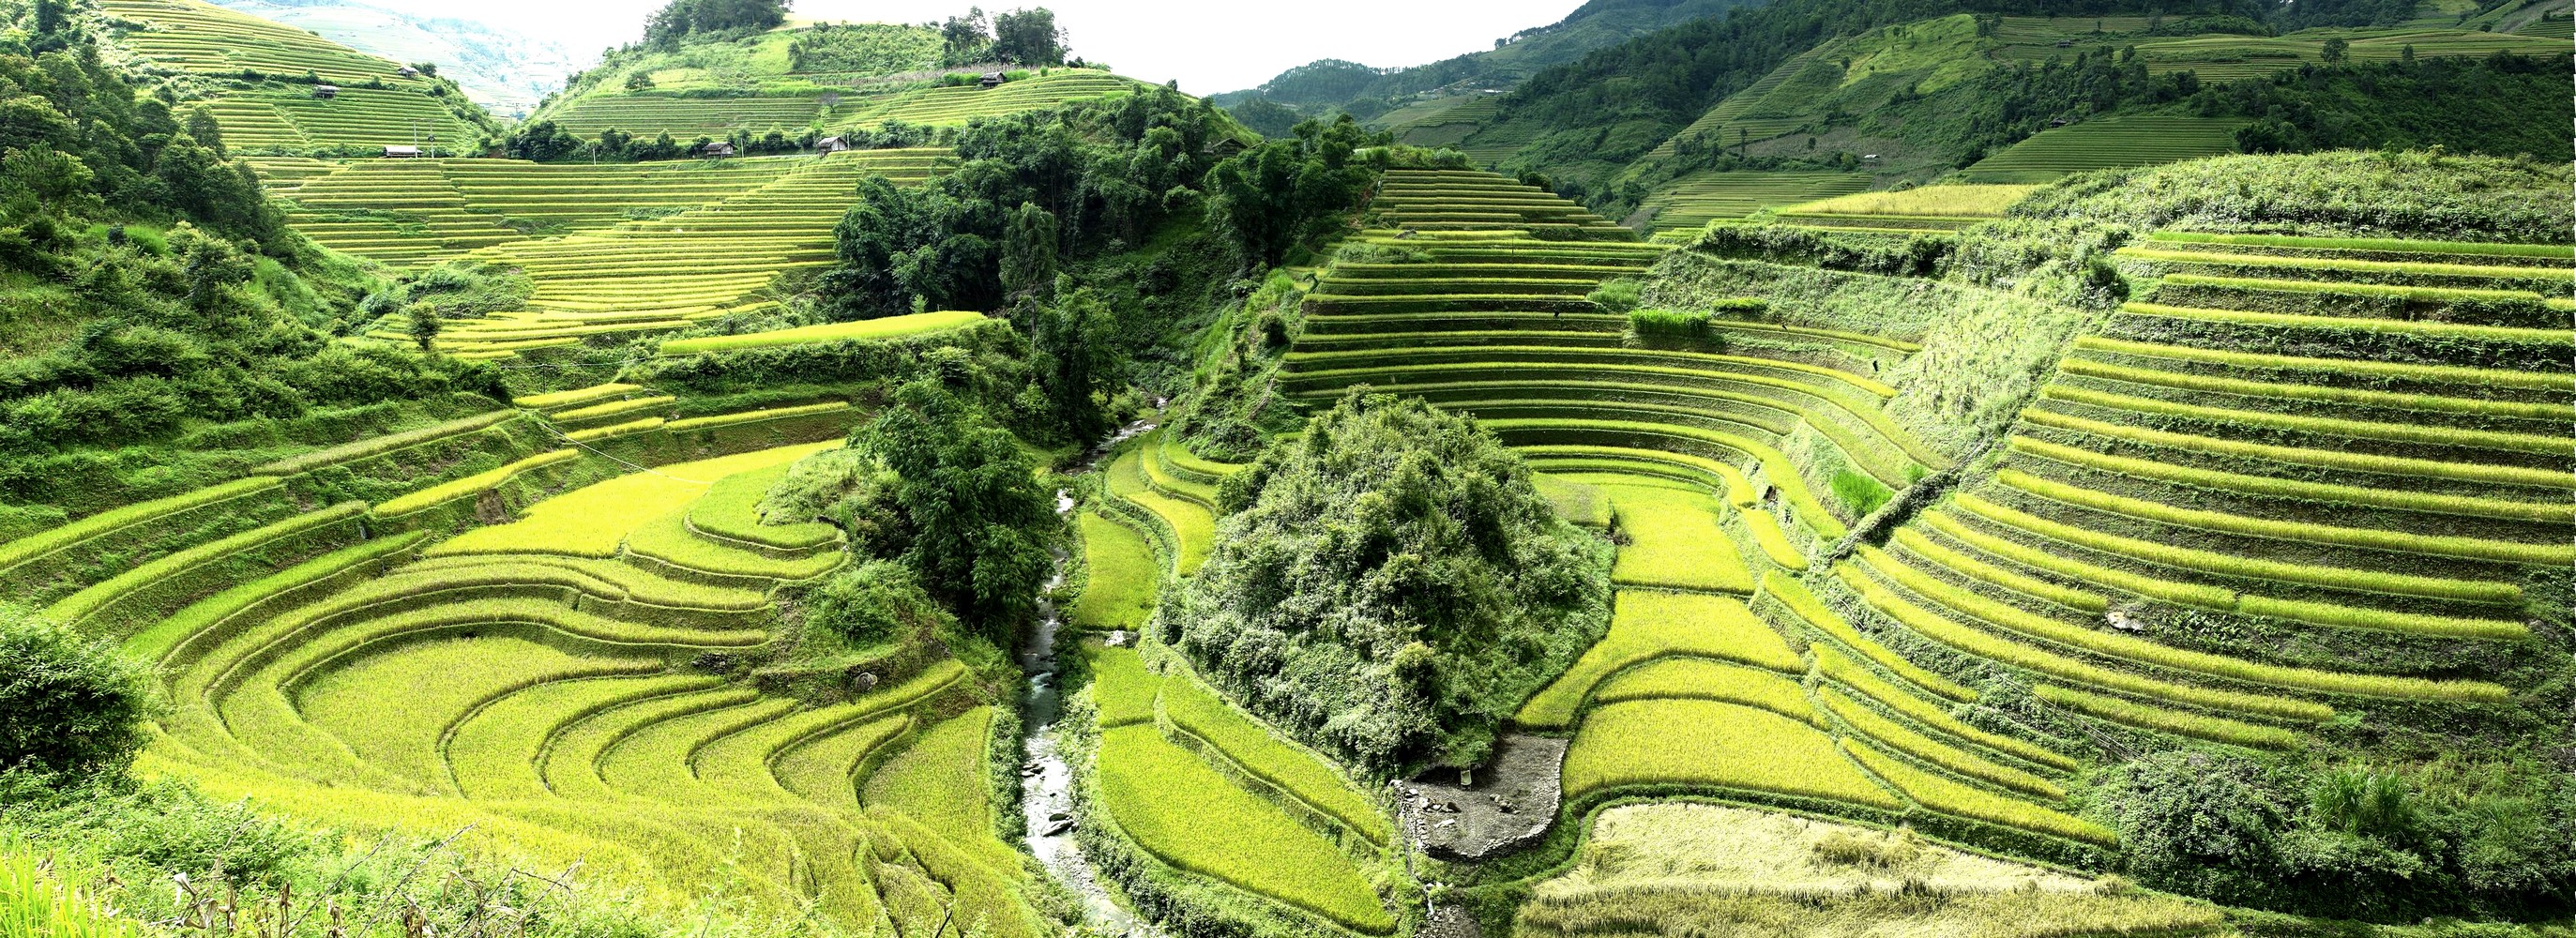 Portraits and landscapes of North Vietnam 16 days